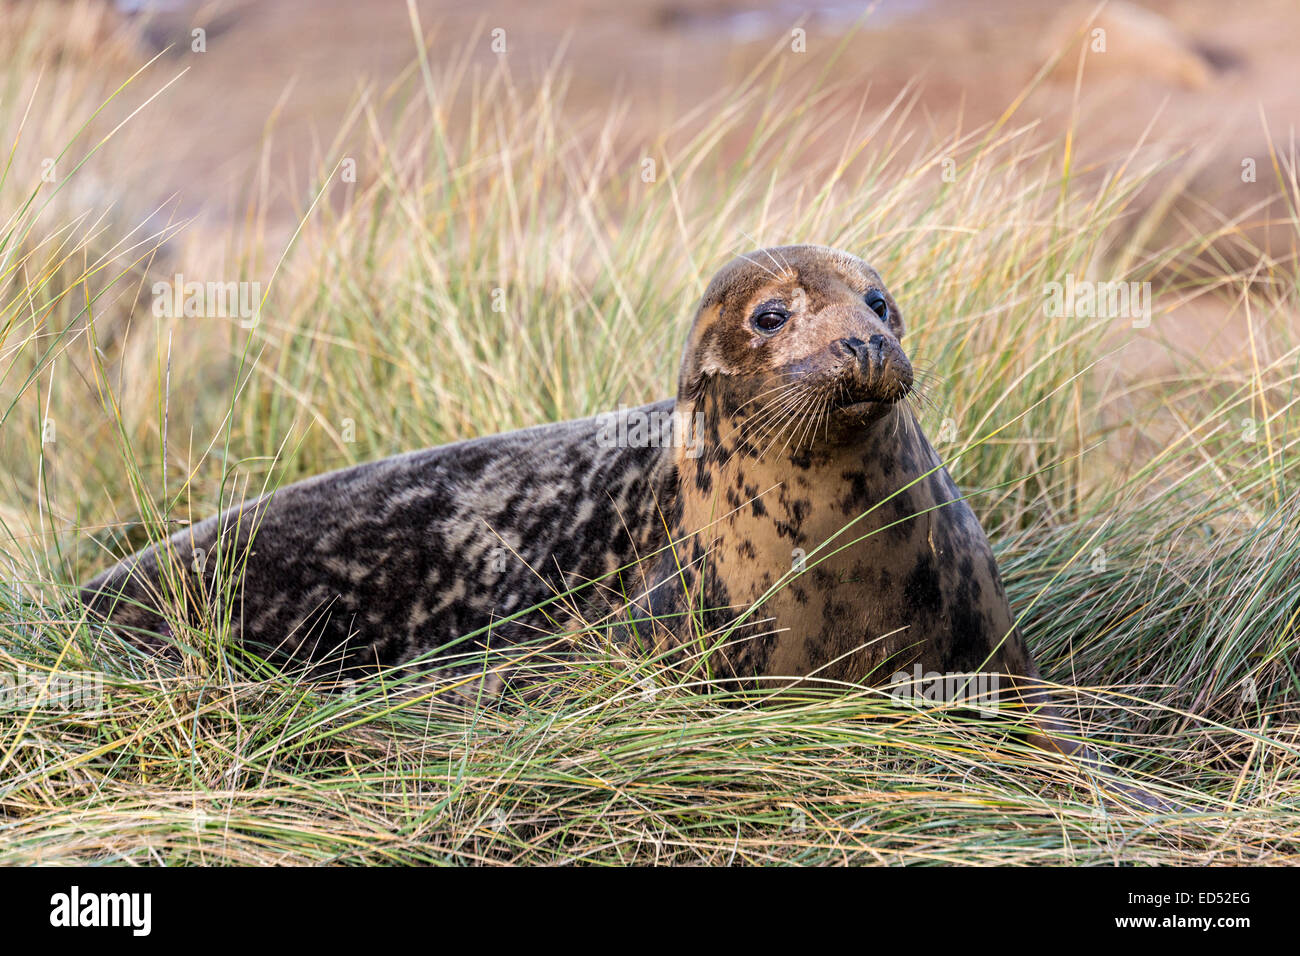 Grey seal, Halichoerus grypus, in marram grass dunes, Donna Nook national nature reserve, Lincolnshire, England, UK Stock Photo